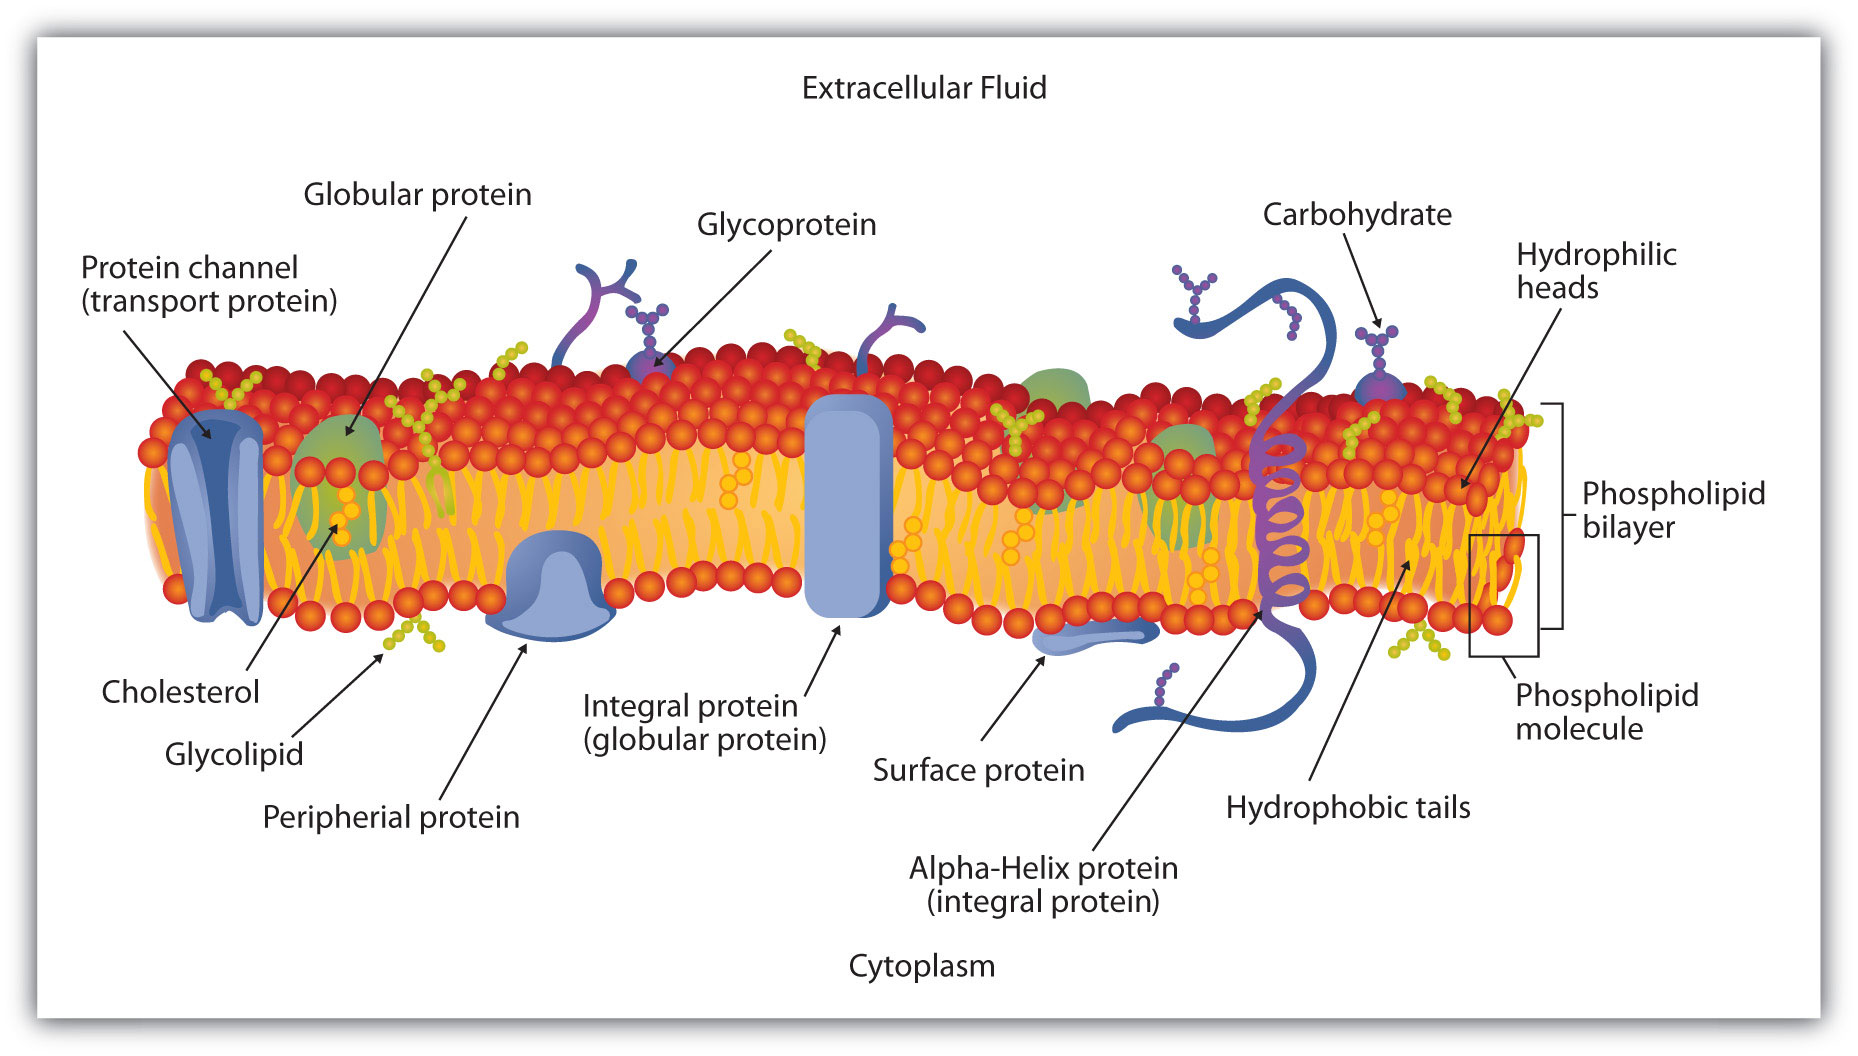 Membrane Lipids - Definition, Structure, Formation, Functions